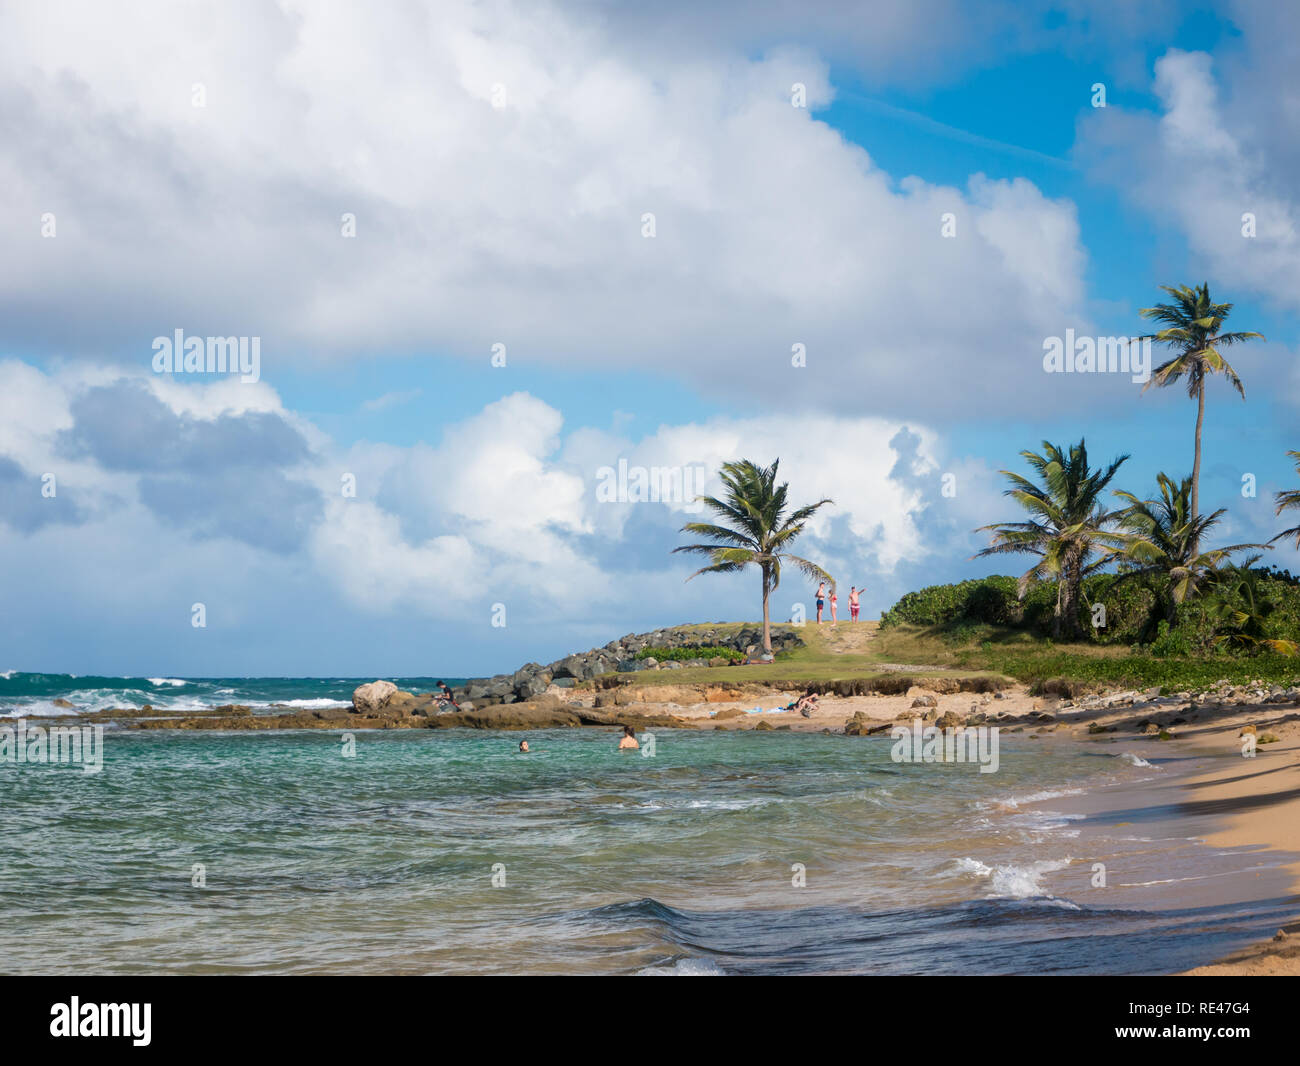 People relax on a beautiful beach in San Juan, Puerto Rico, on a warm and sunny day Stock Photo